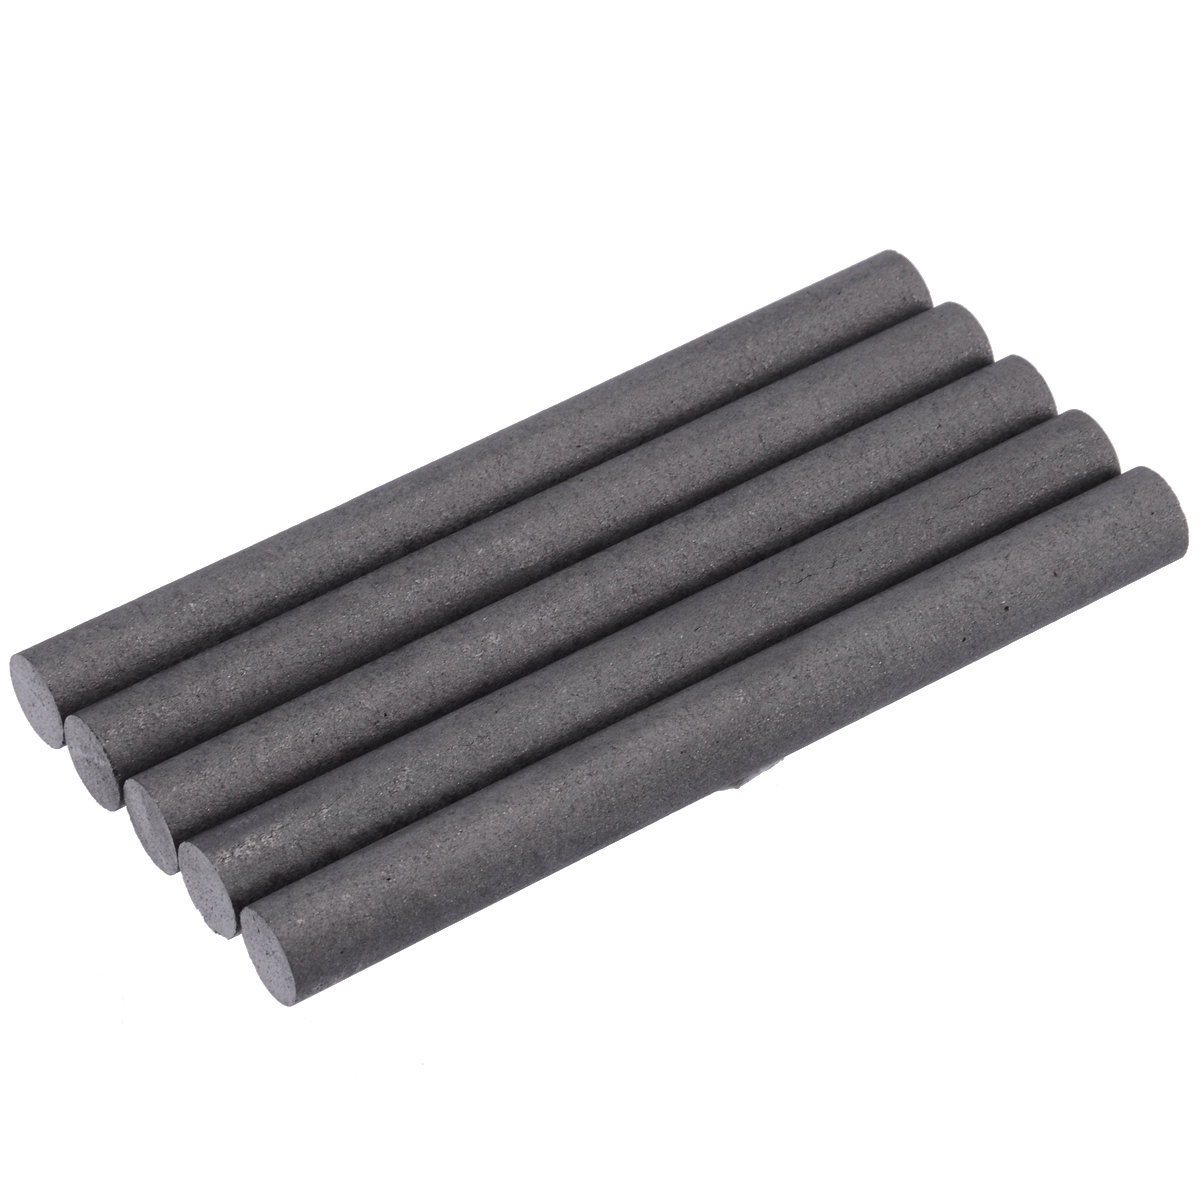 5Pcs High Purity 99.99% Graphite Rods High Temperature Conductive Graphite Electrode Cylinder Rods Bars 100mm For Industry Tools